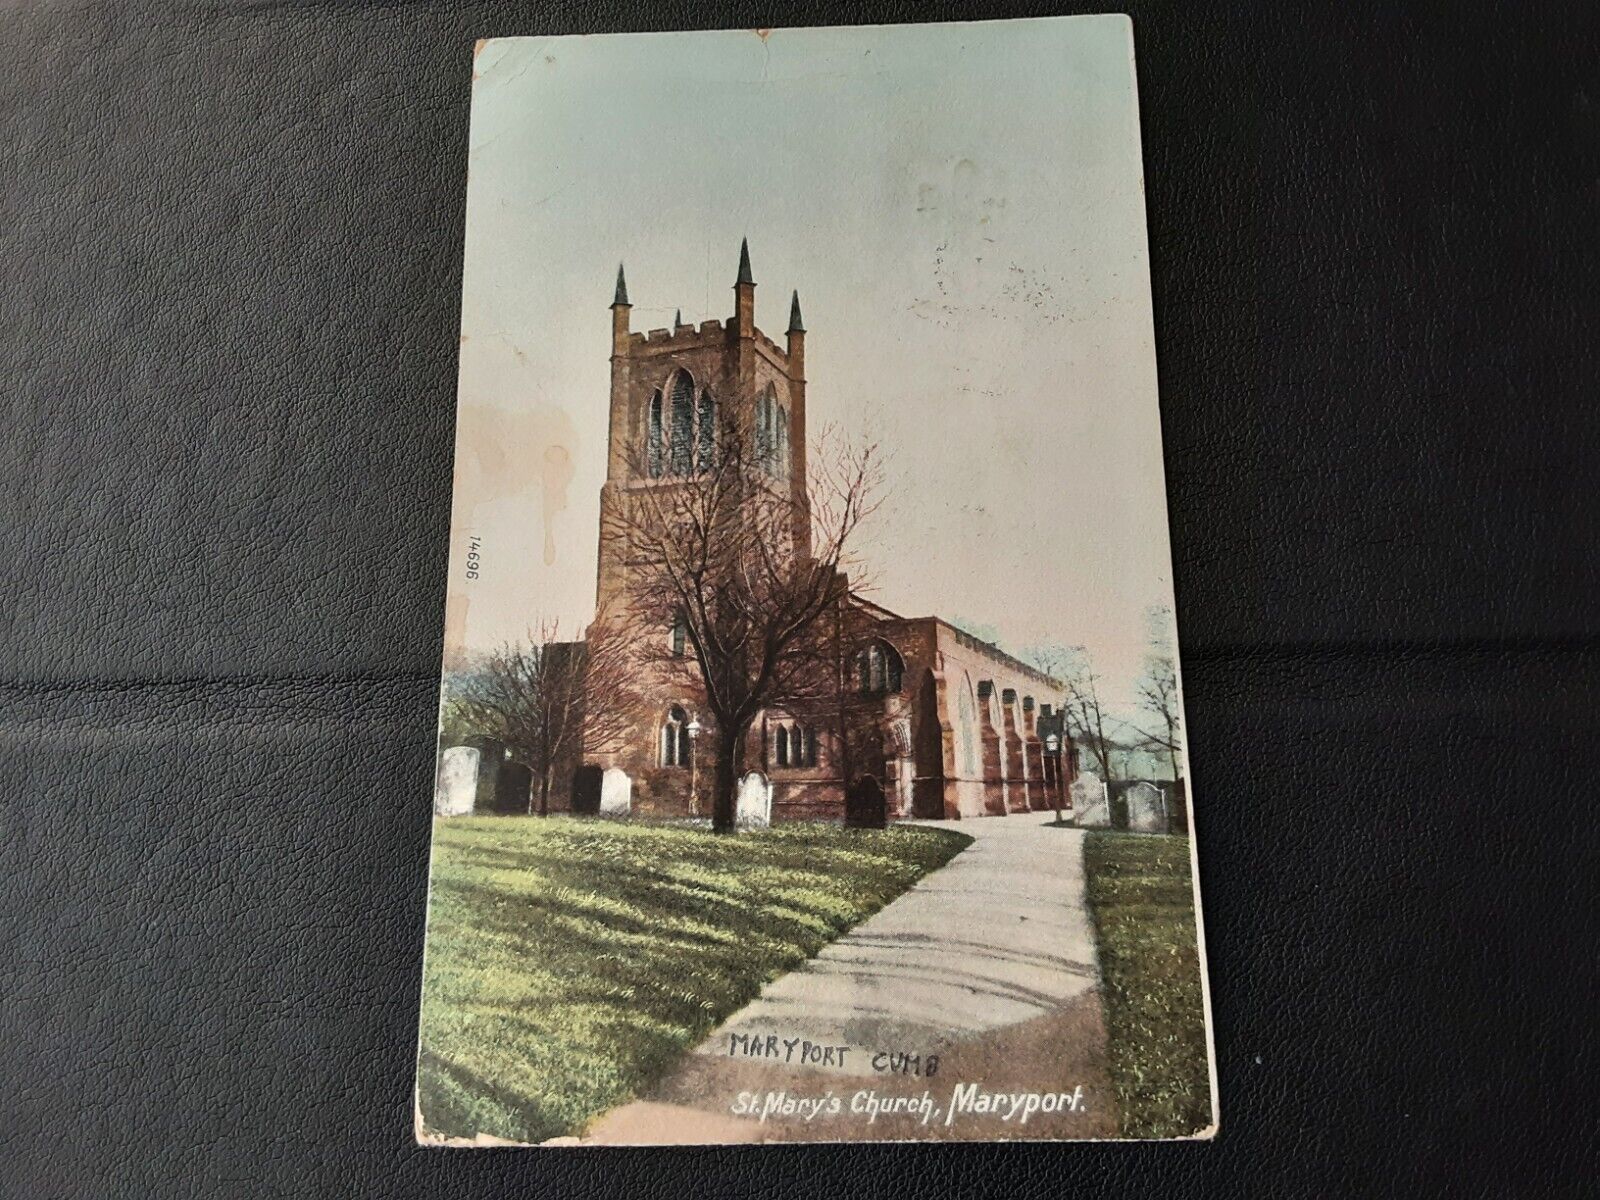 House Clearance - Old Wrench service of St Mary's Church, Maryport, Cumbria posted 1908 AF